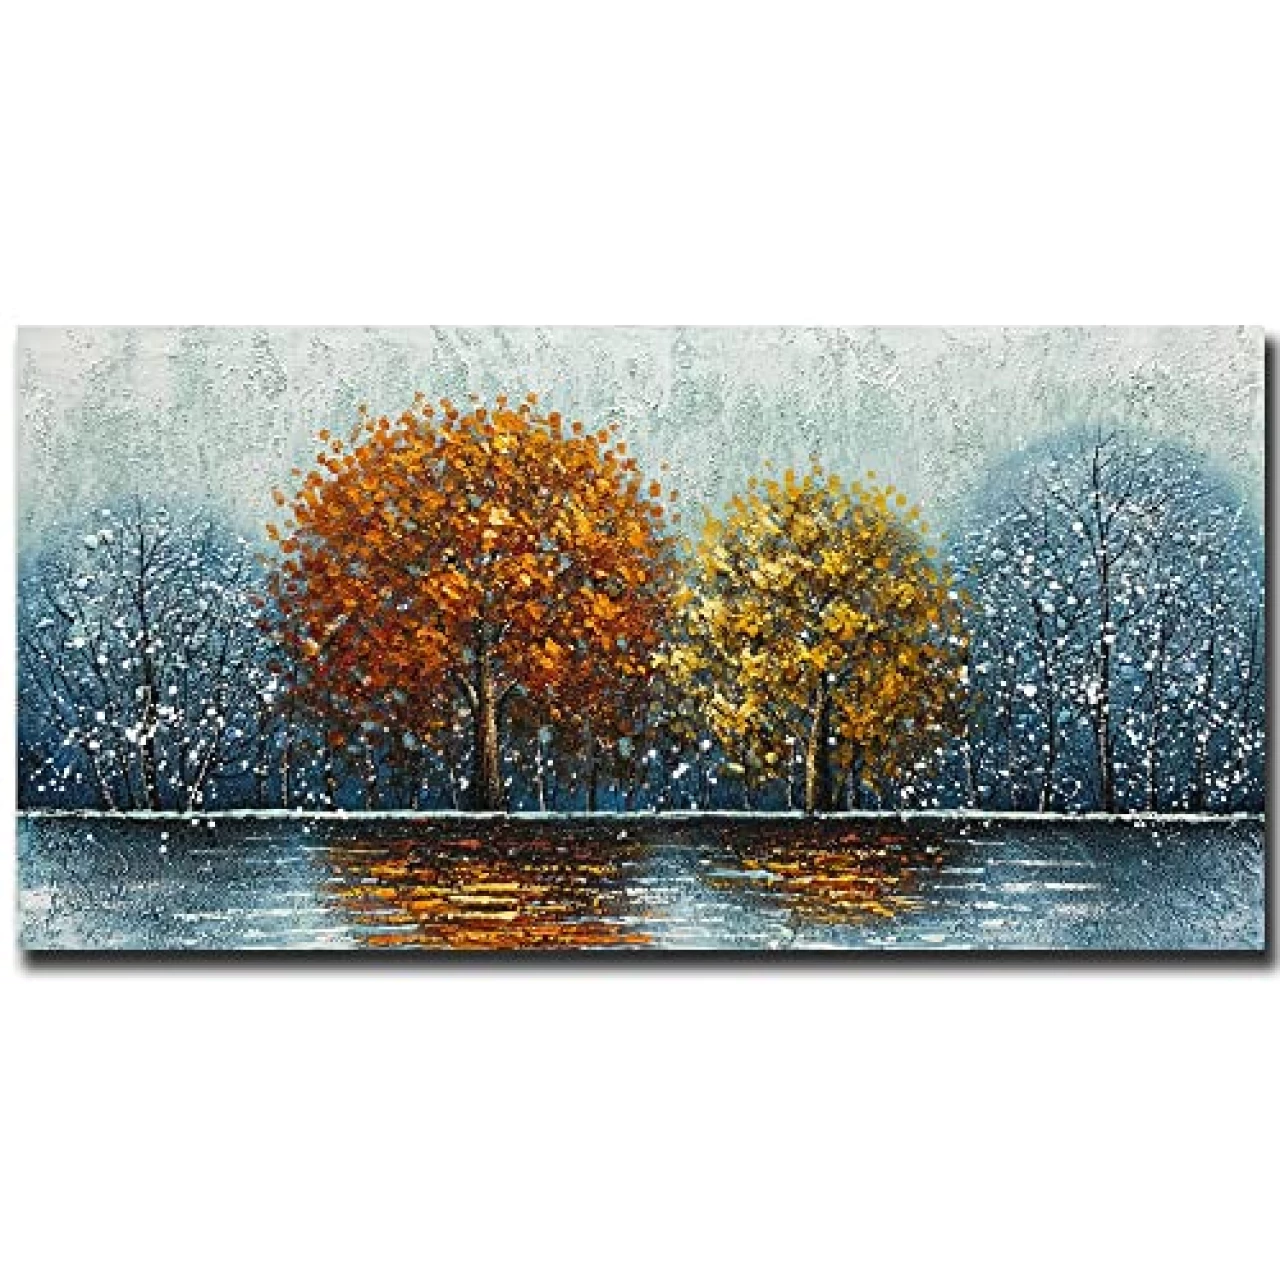 V-inspire Art,24x48 Inch Modern Abstract Hand-Painted Oil Painting Tree Art Wall Art For Living room Bedroom Canvas For Wall Decorations